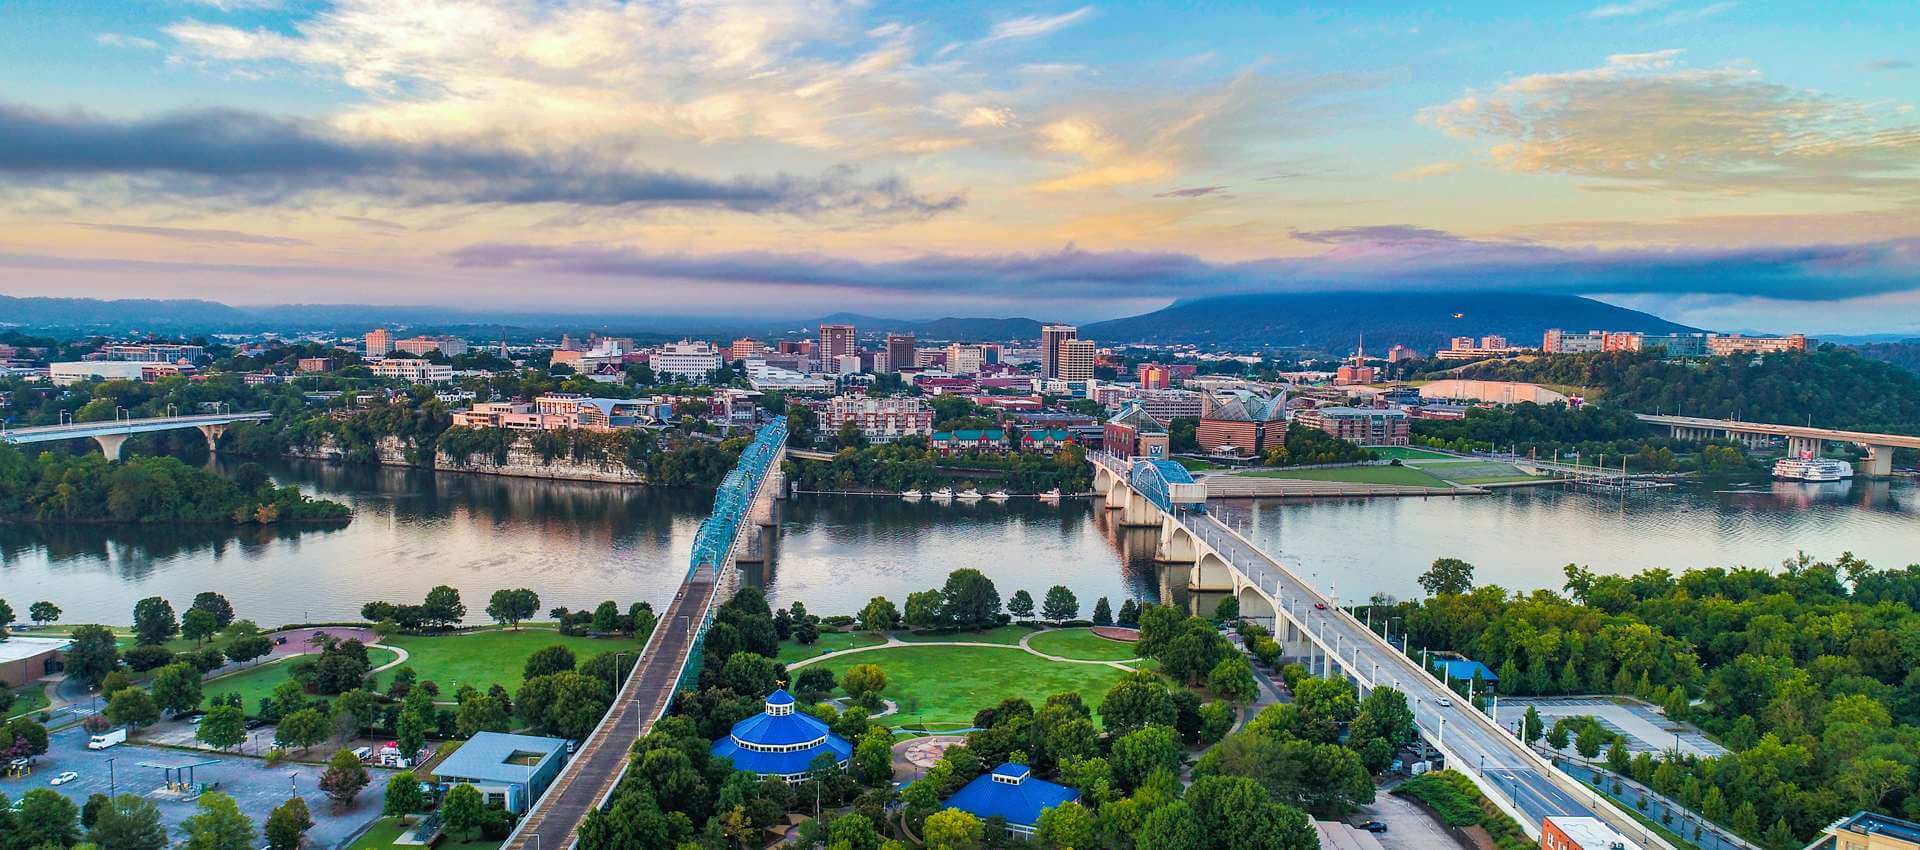 FlipCo Financial Lending in Chattanooga, Tennessee